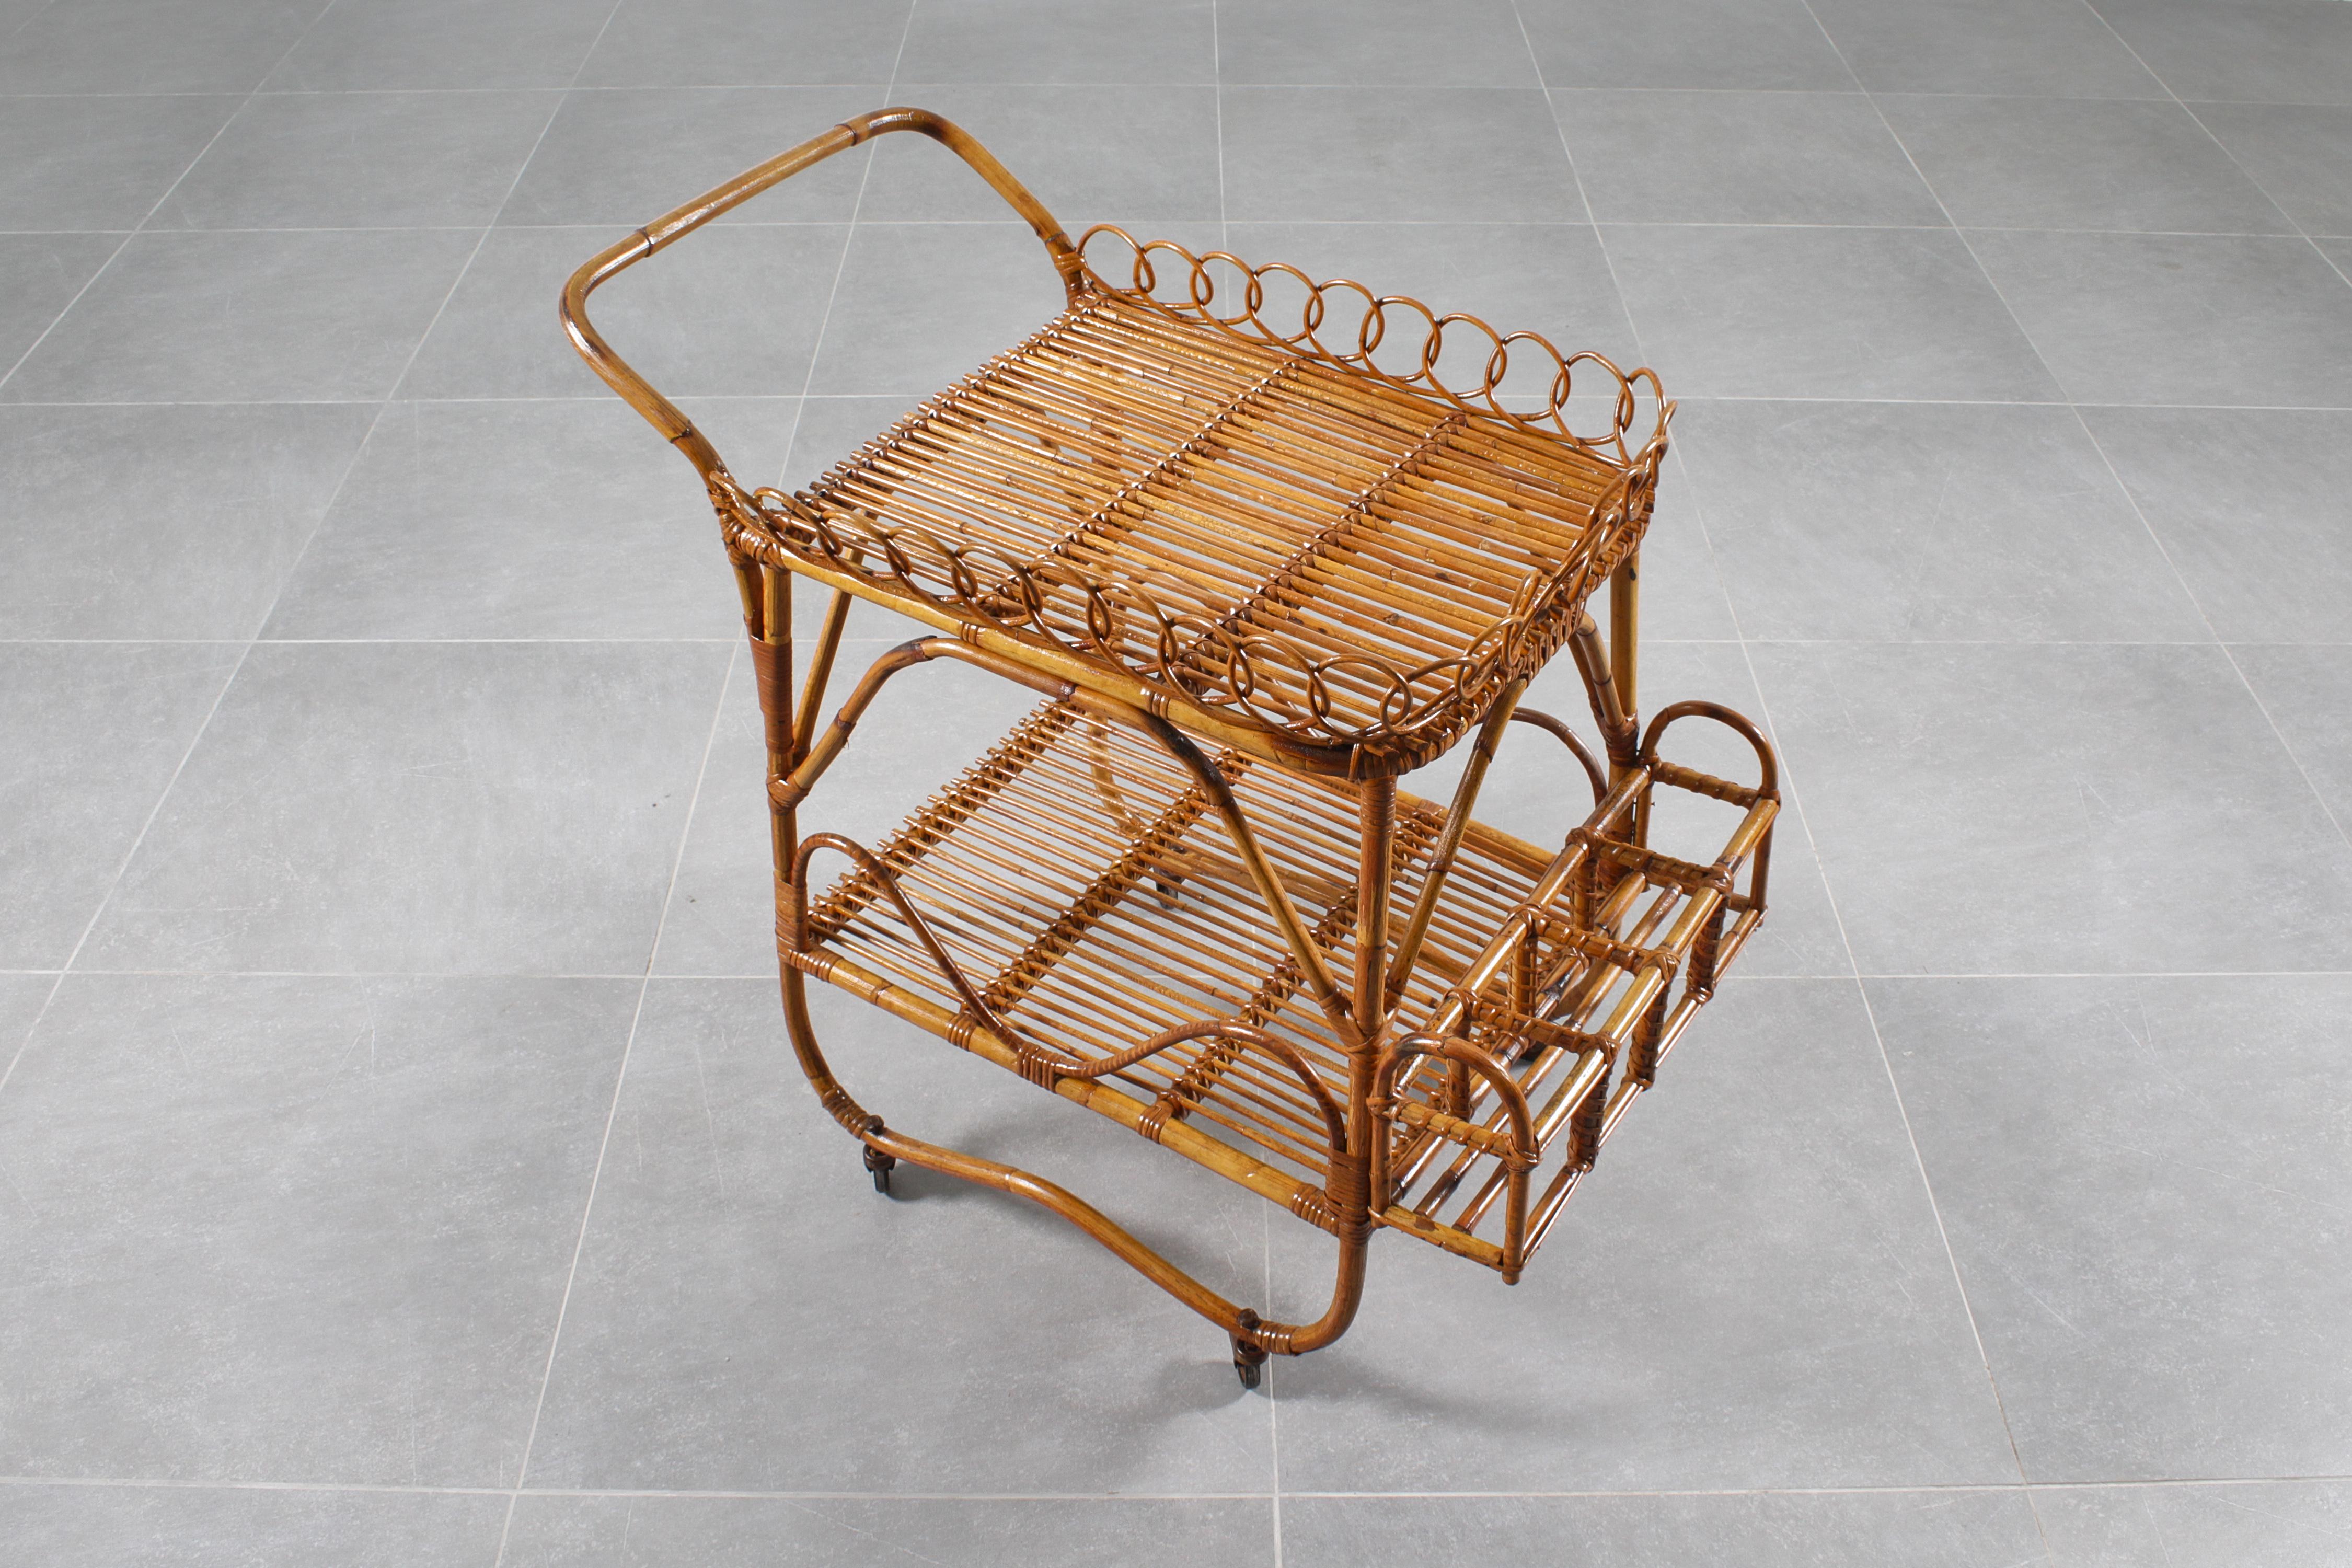 Elegant and rustic bar trolley in bamboo cane and rattan, with two large tops, handle, protruding bottle holder, resting on four wheels. Attributable to Bonacina, Italian manufacture from the 1960s
Wear consistent with age and use.